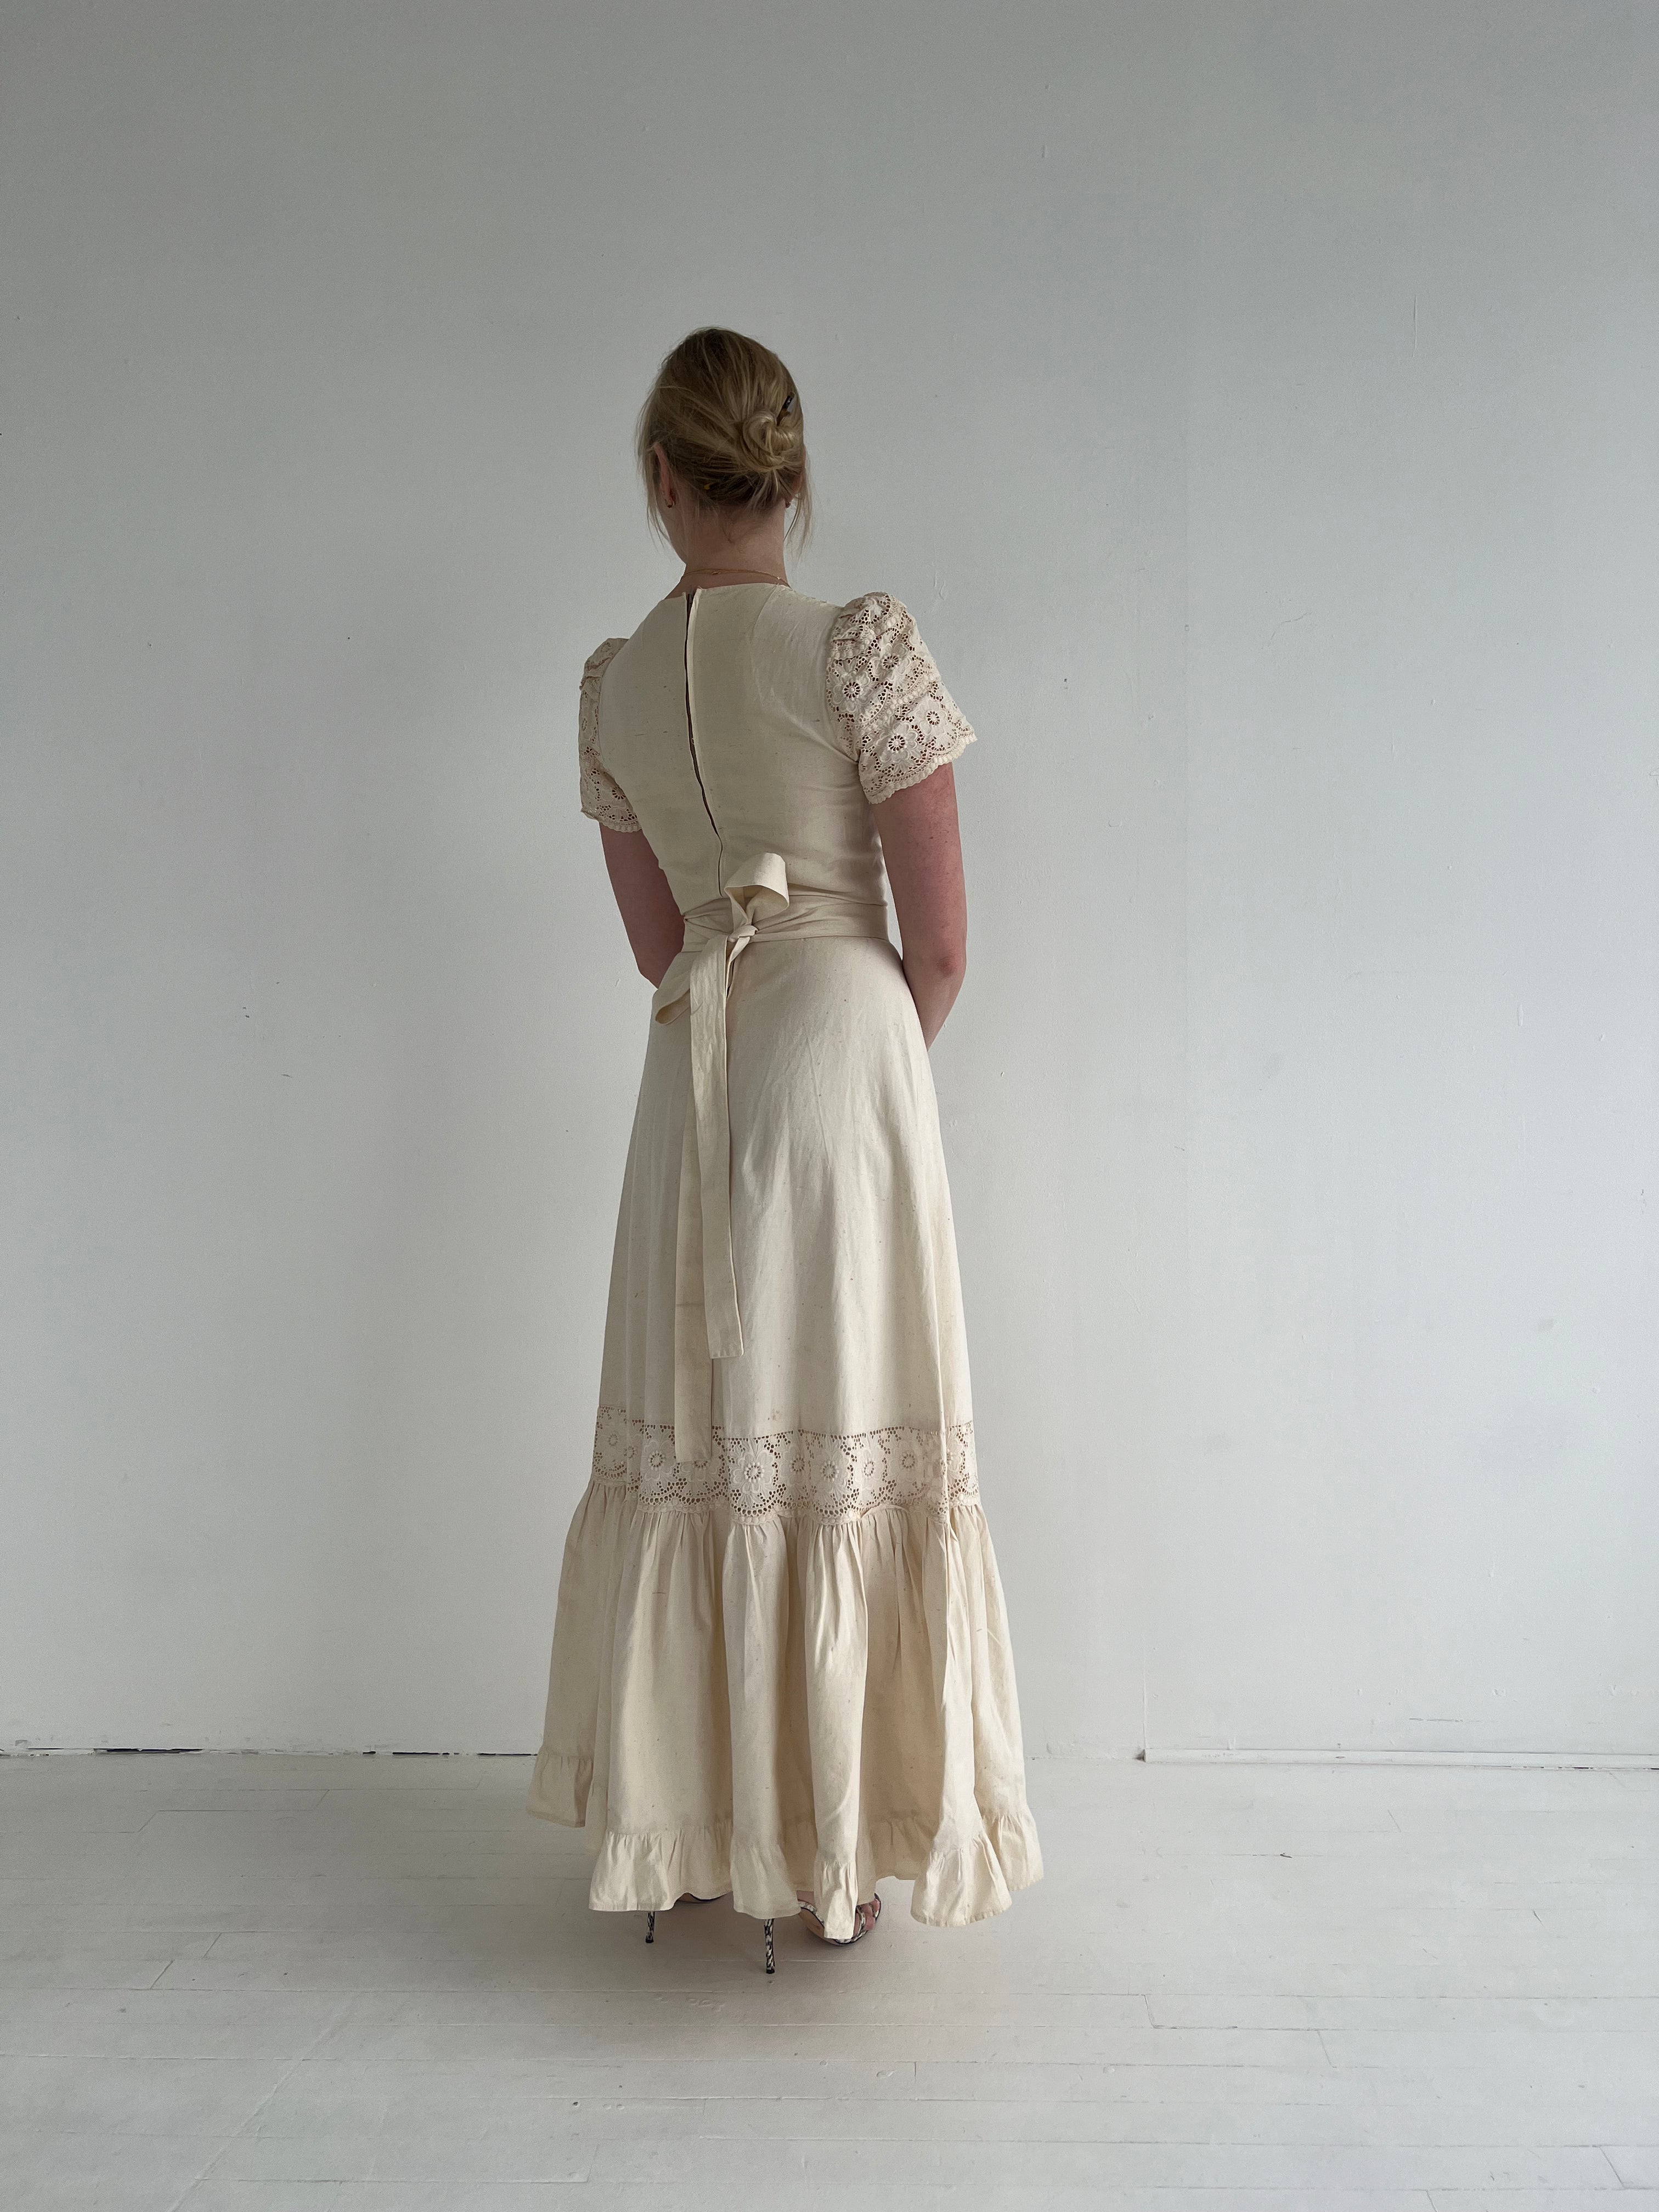 1970's Cotton Dress with Eyelet